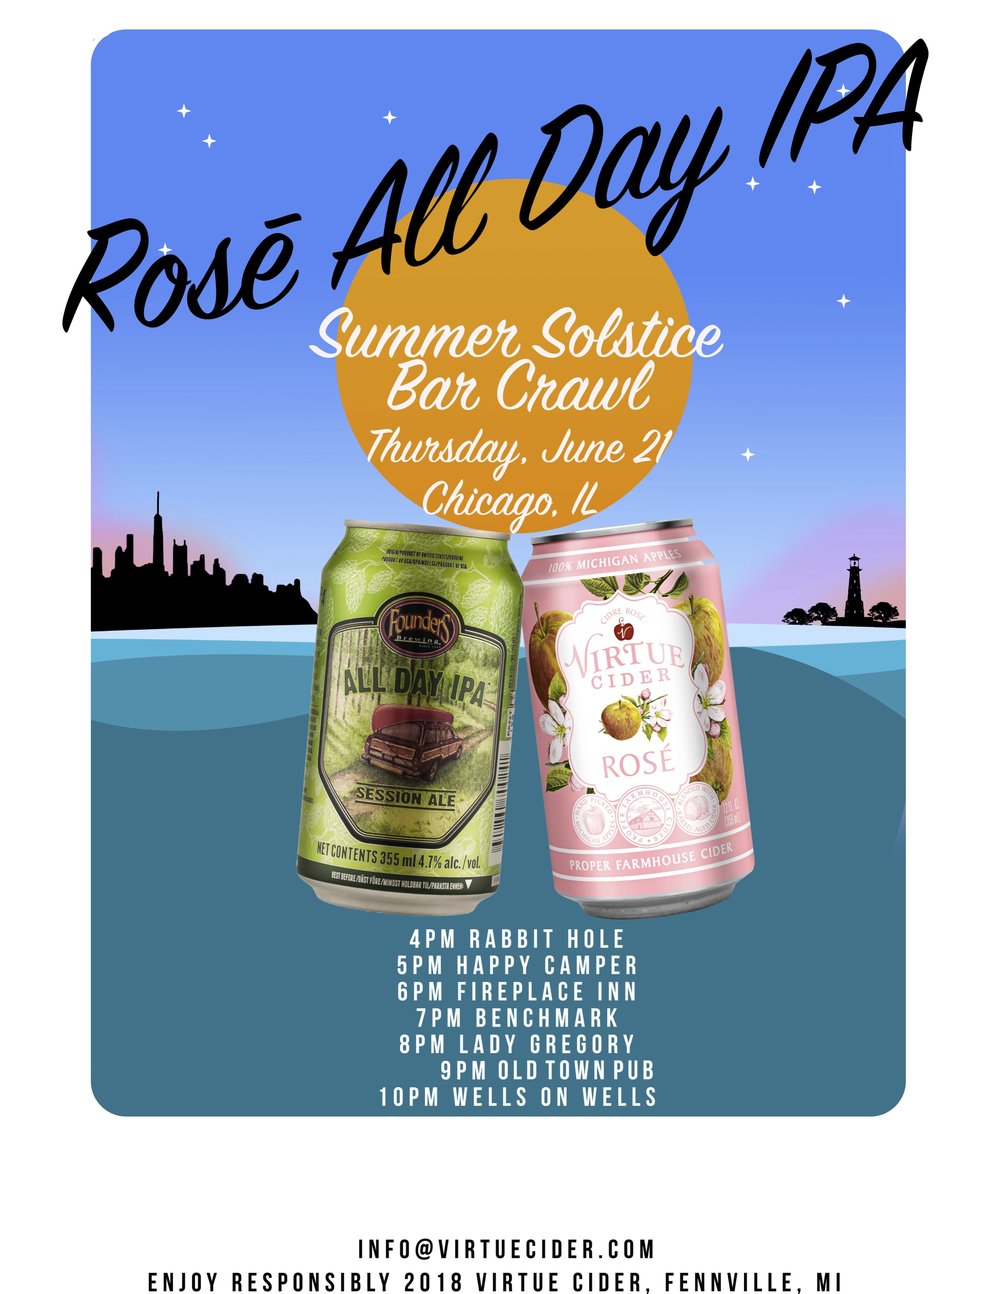 rosé all day IPA